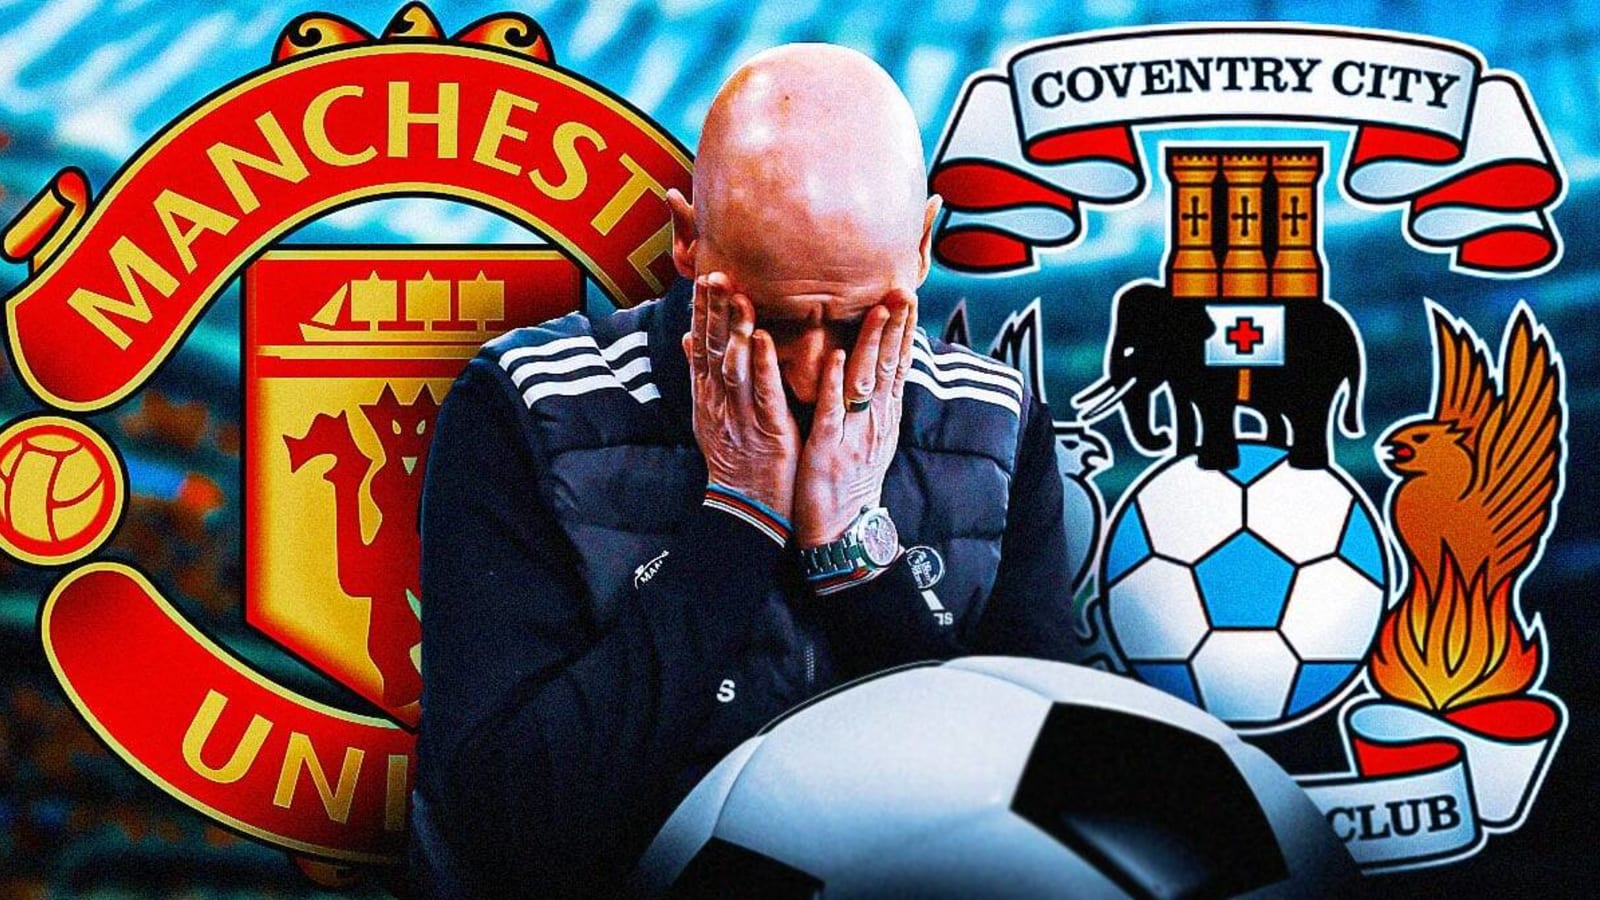 Manchester United’s Erik ten Hag talks on horrible game vs Coventry in FA Cup